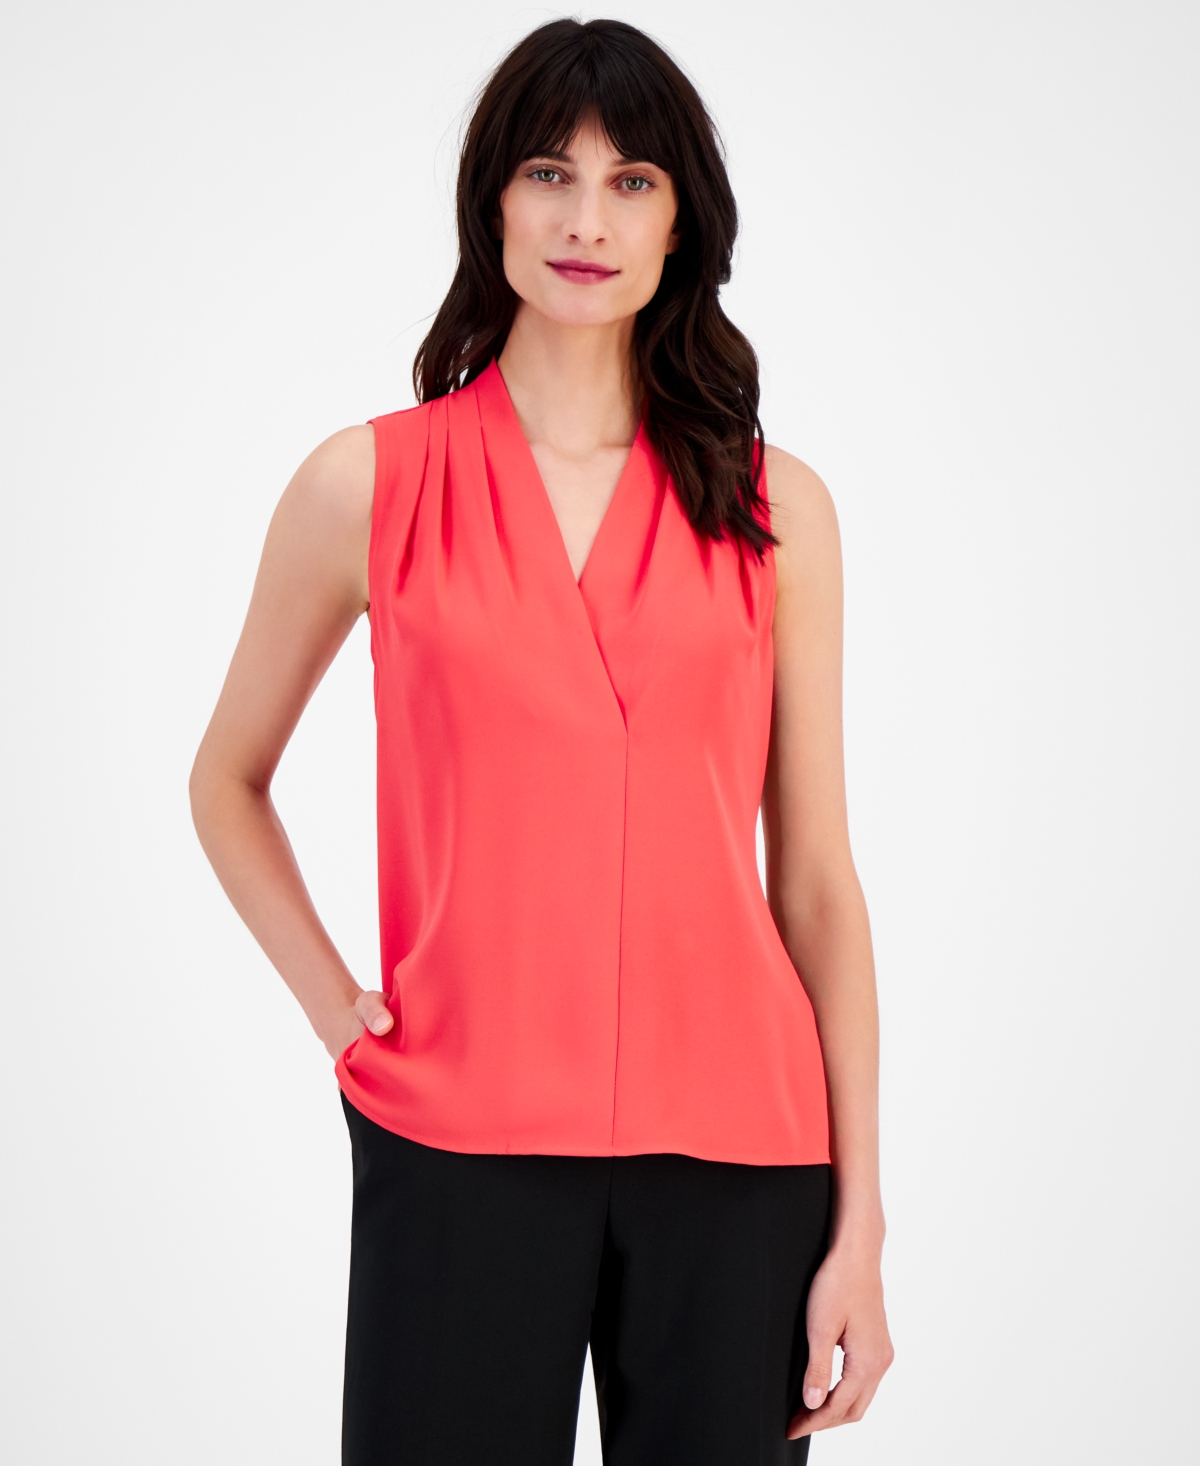 Women's Pleated Sleeveless Blouse - Red Pear